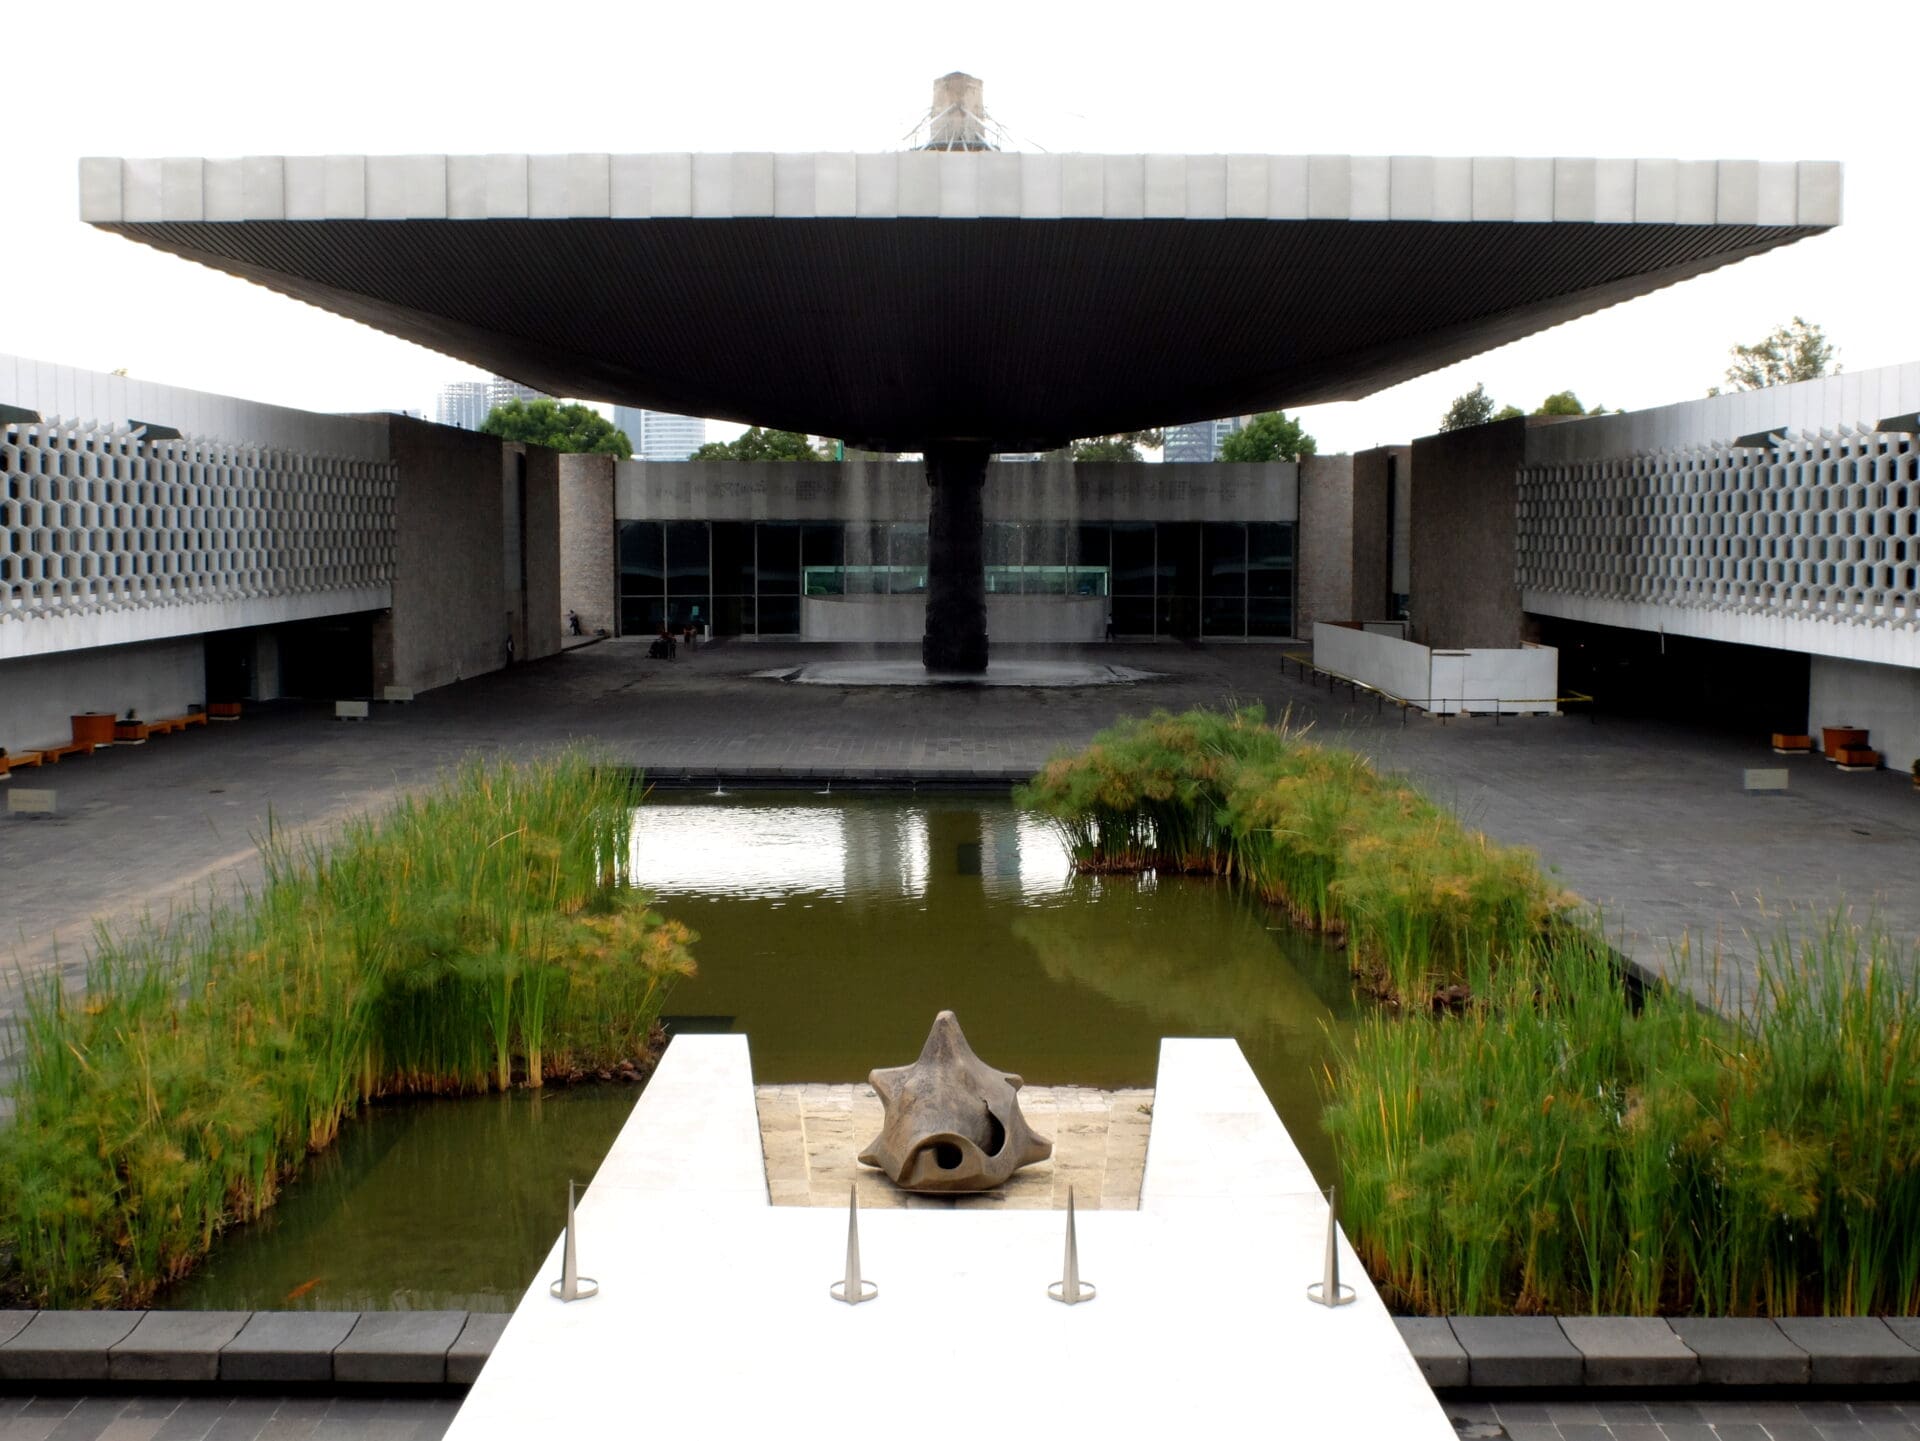 The best art galleries and museums in Mexico City | The exterior of the National Museum of Anthropology in Mexico City.